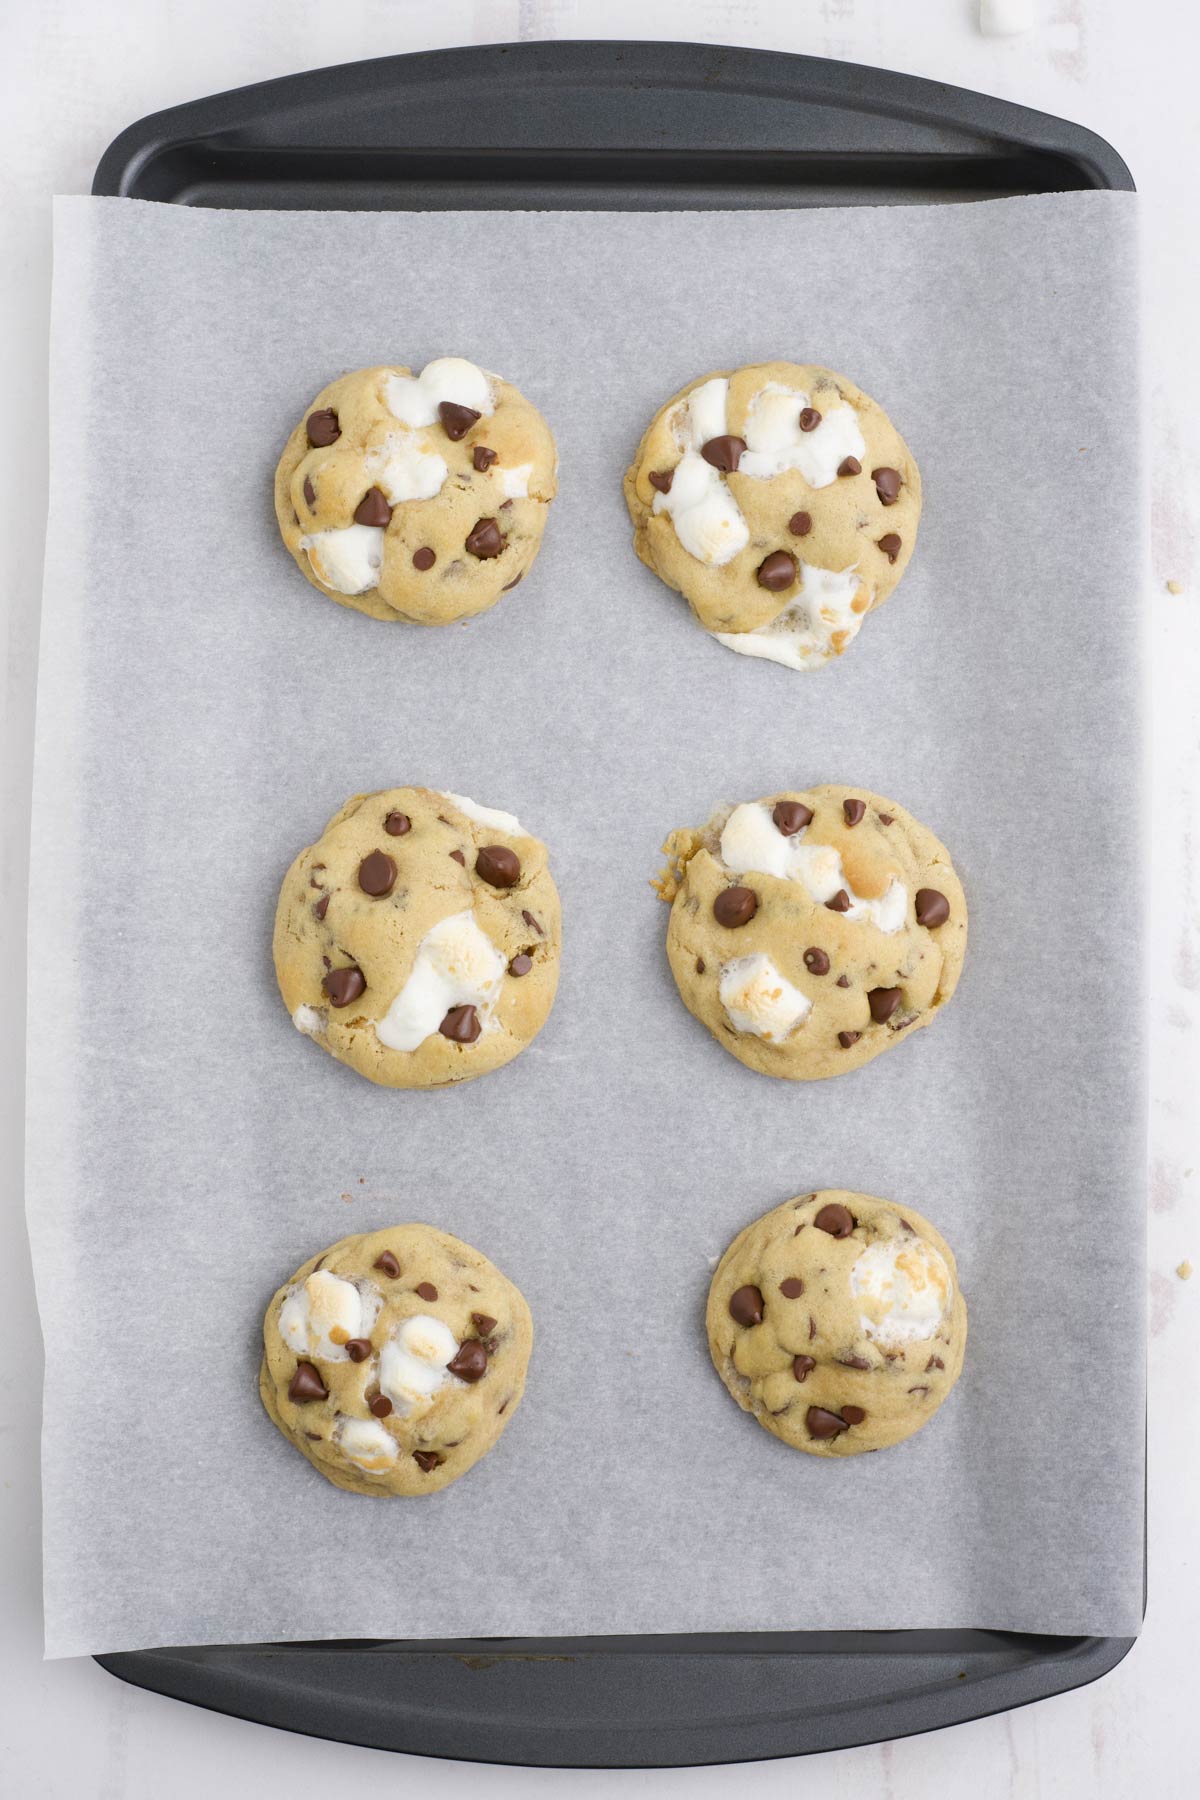 Baked chocolate chip marshmallow cookies on a baking tray.